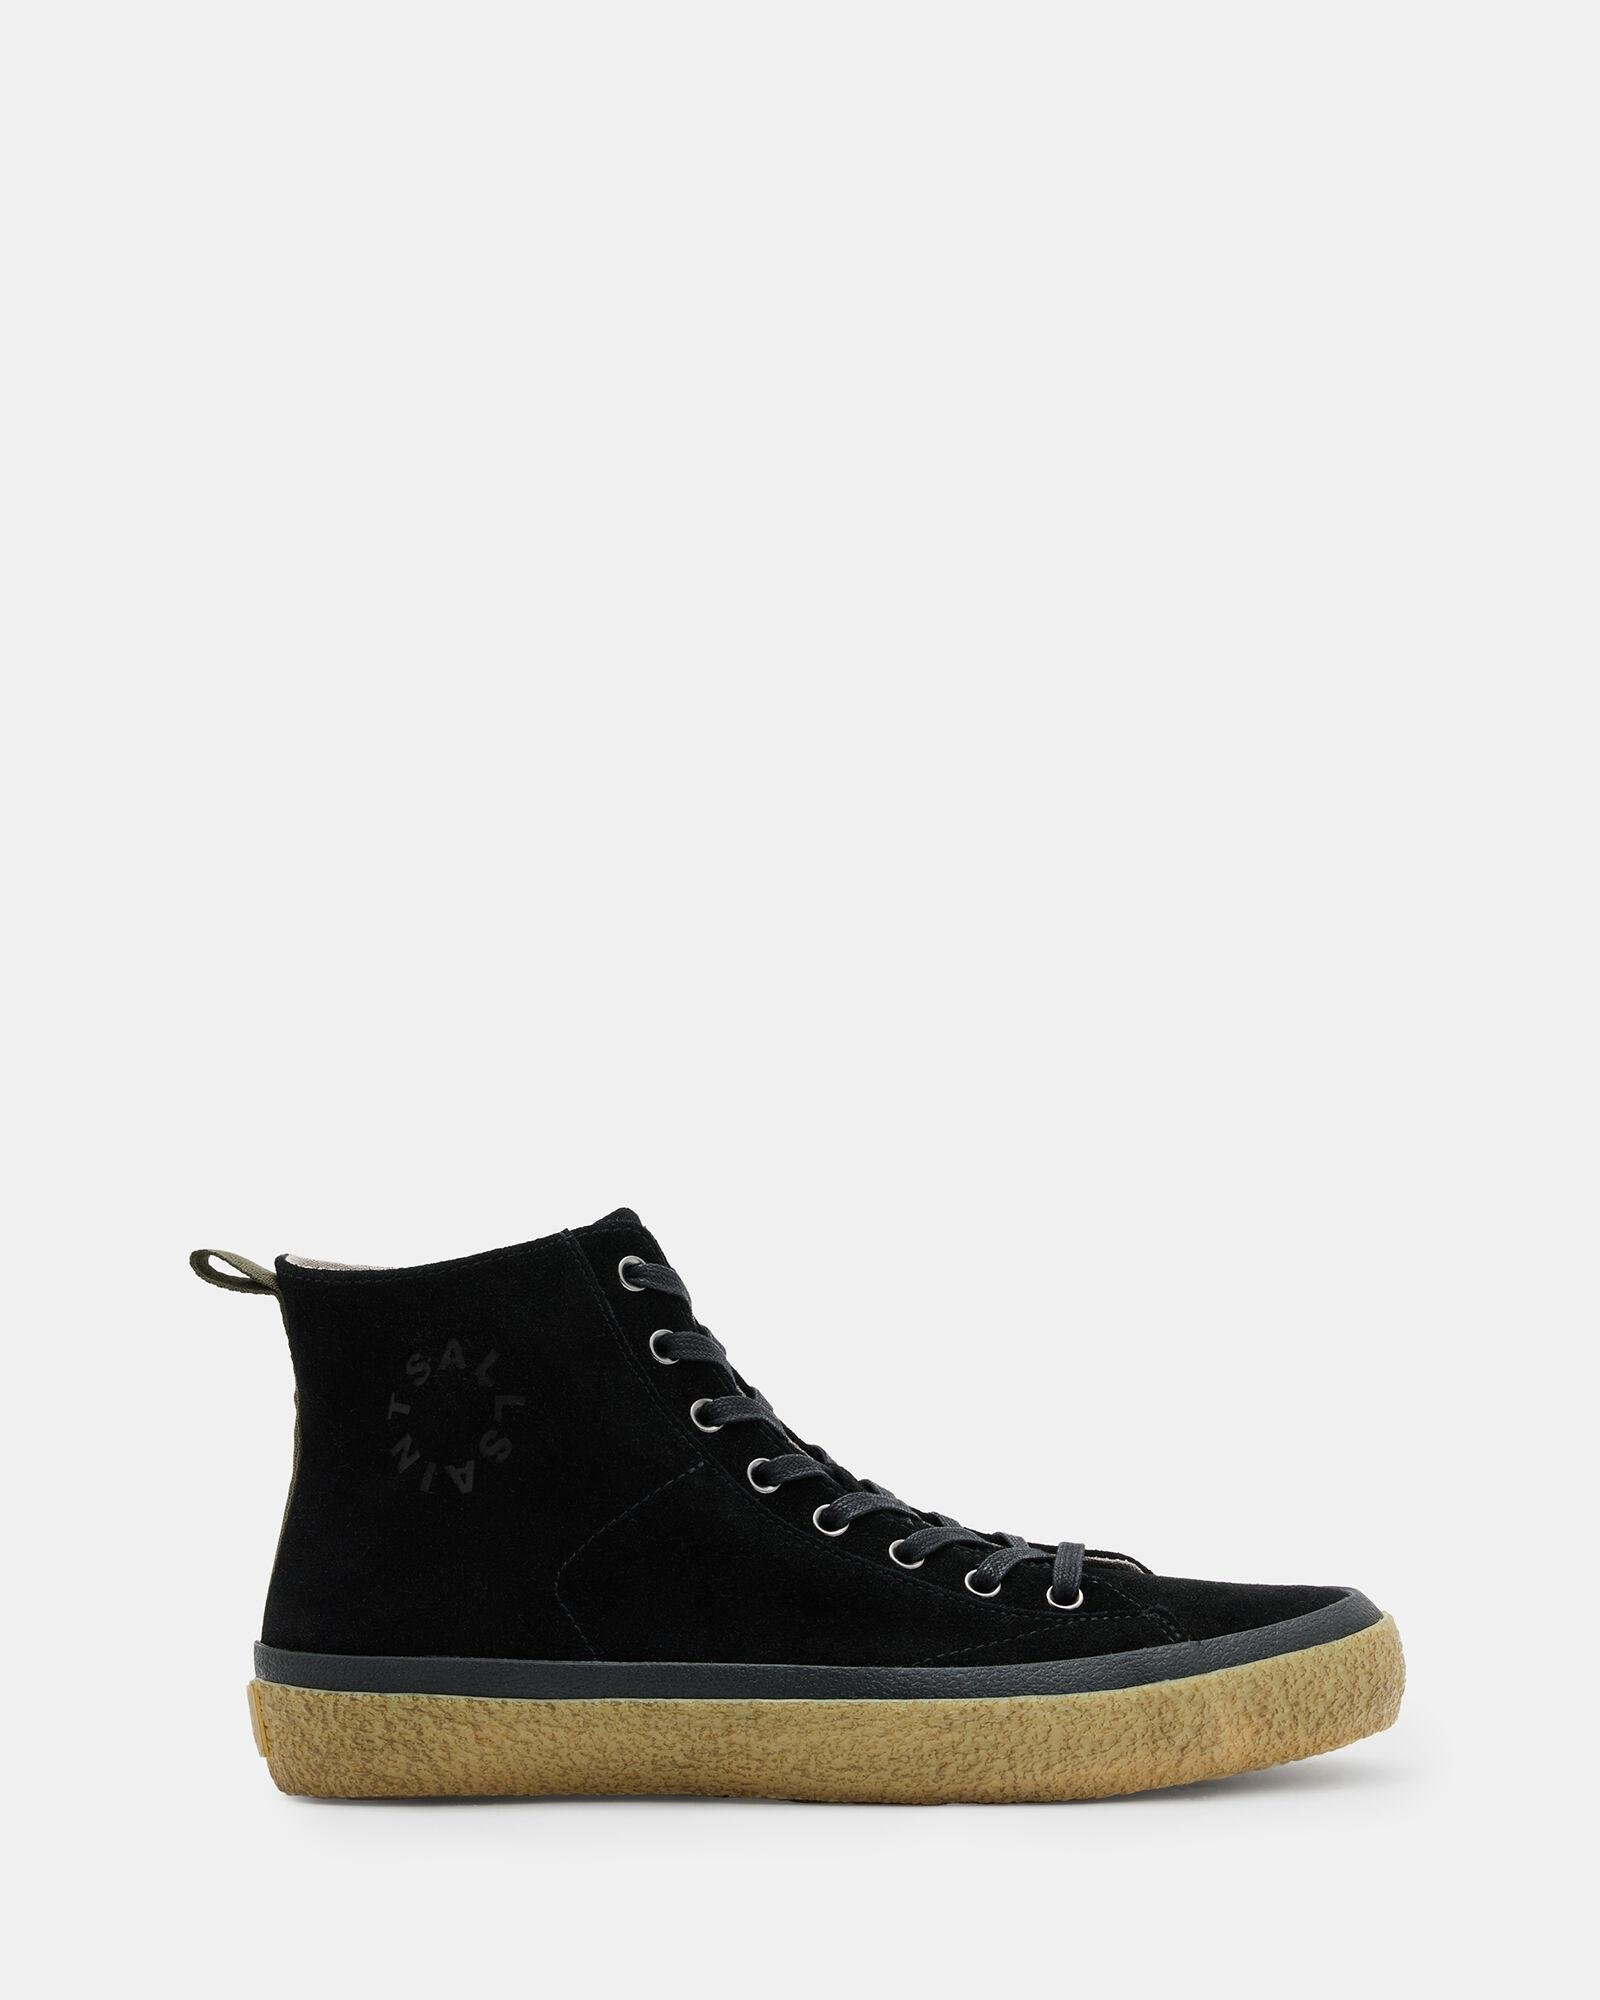 Crister Logo Leather High Top Sneakers by ALLSAINTS